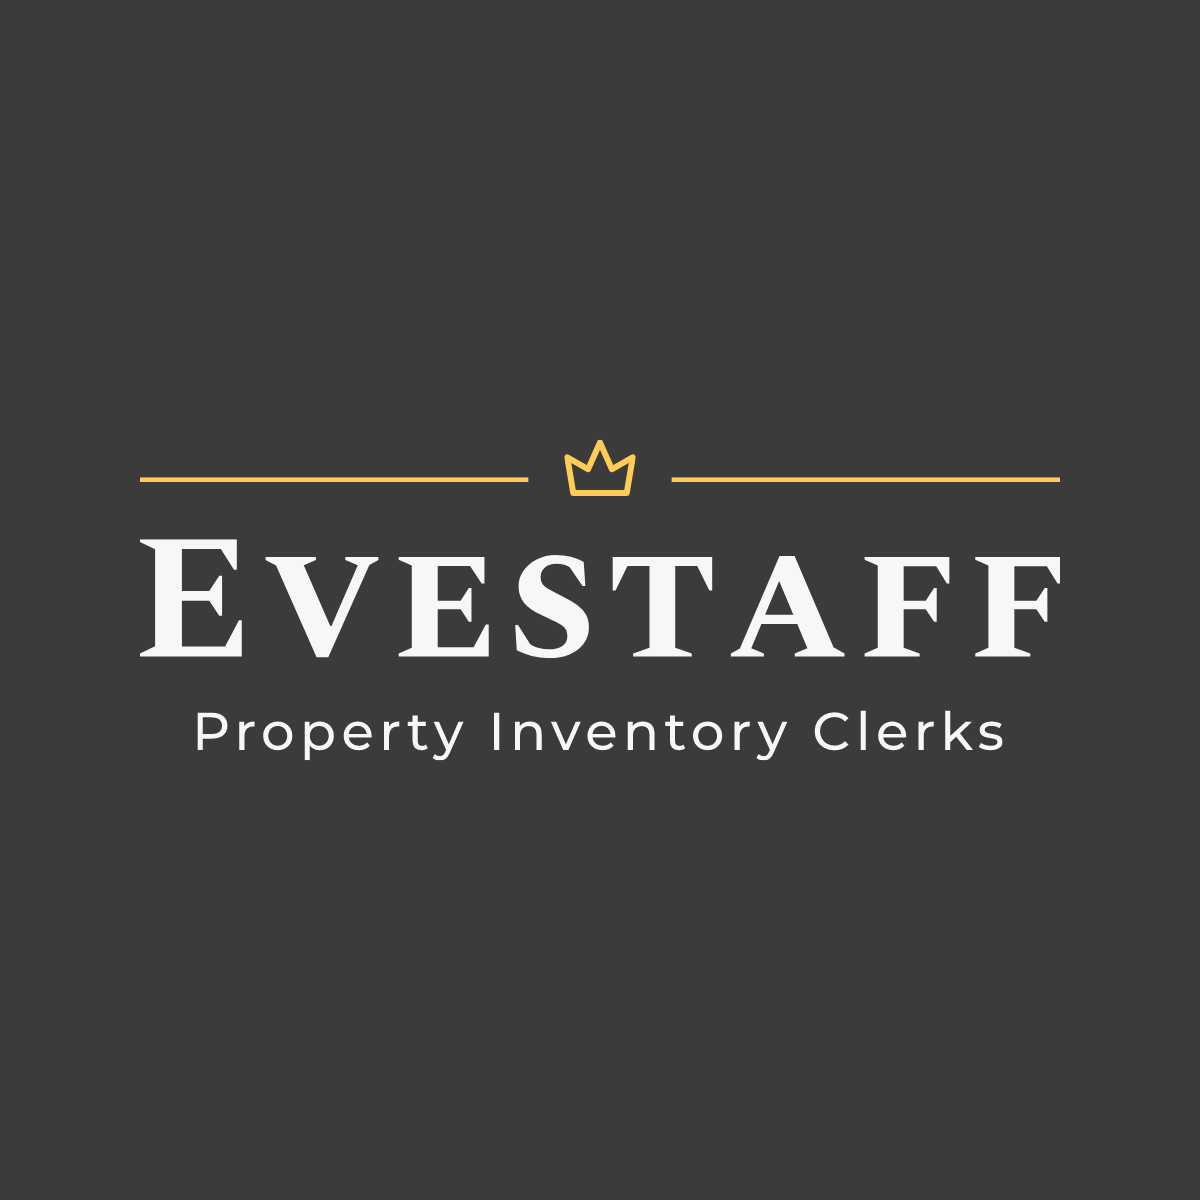 Property Inventory Clerks